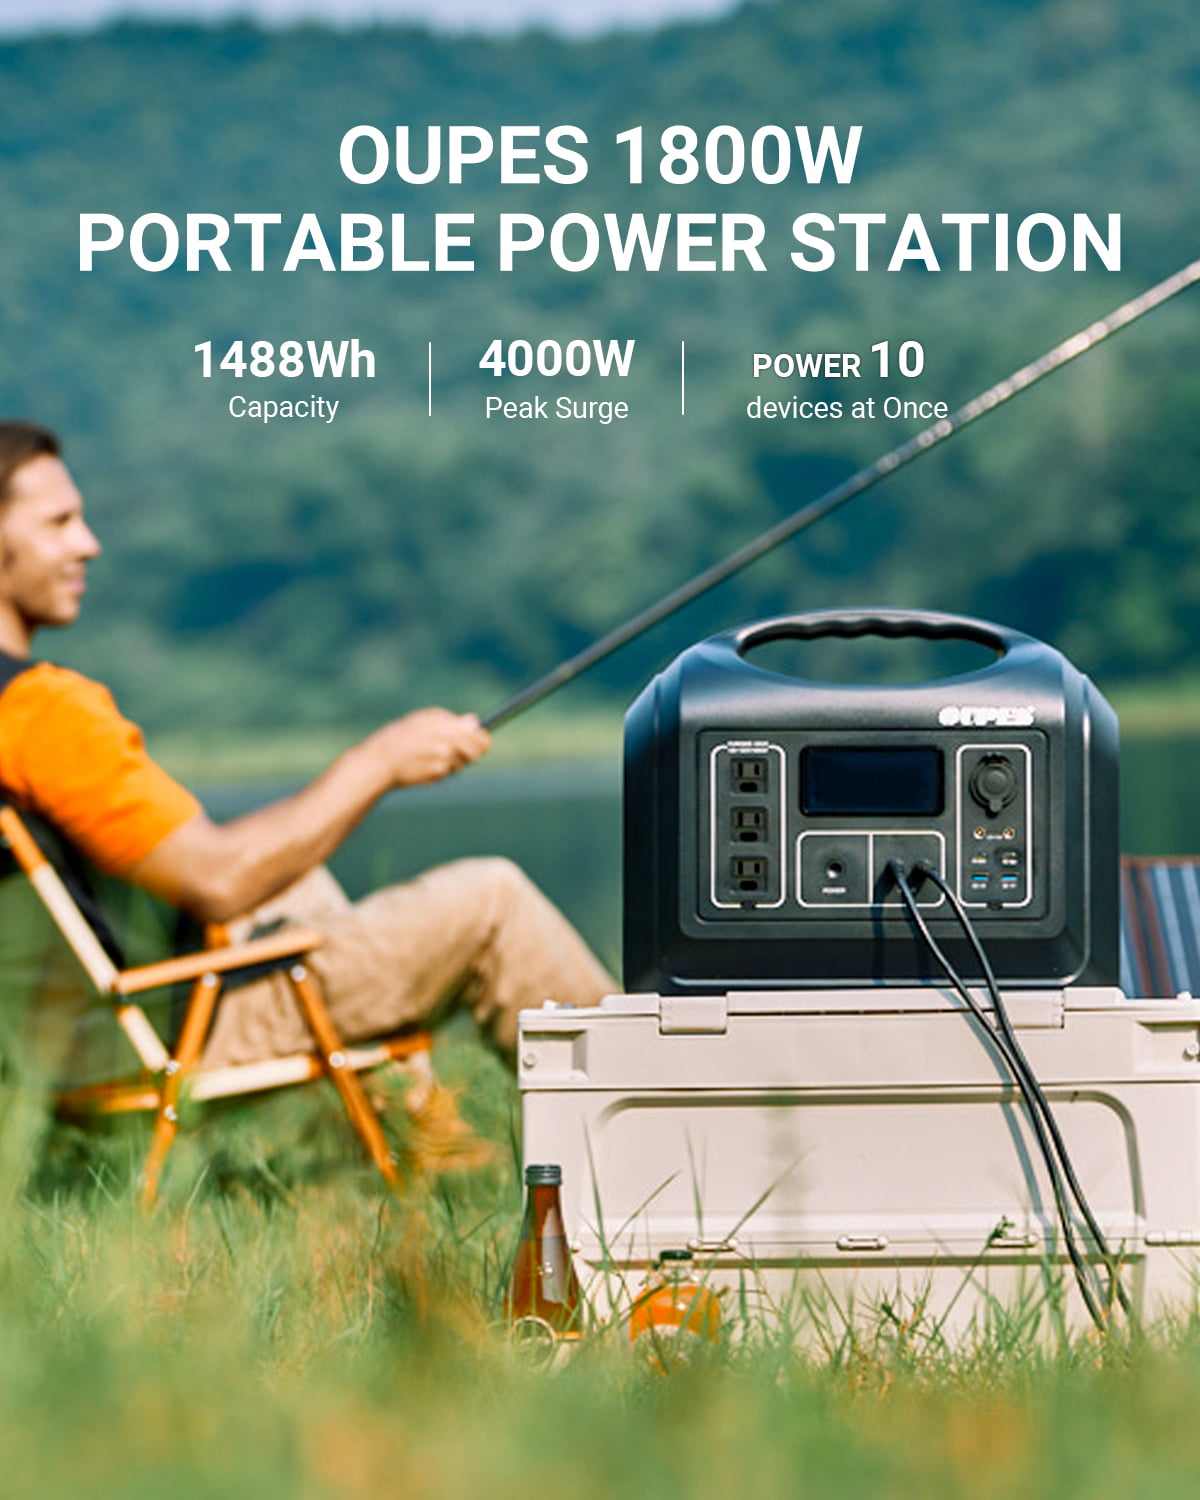 Station, Power 4000+ Peak), AC OUPES Home Camping mAh) Use, with 1488Wh 3 Generator Battery for Outlets Backup LiFePO4 (465000 Portable (4000W Solar Cycle 1800W